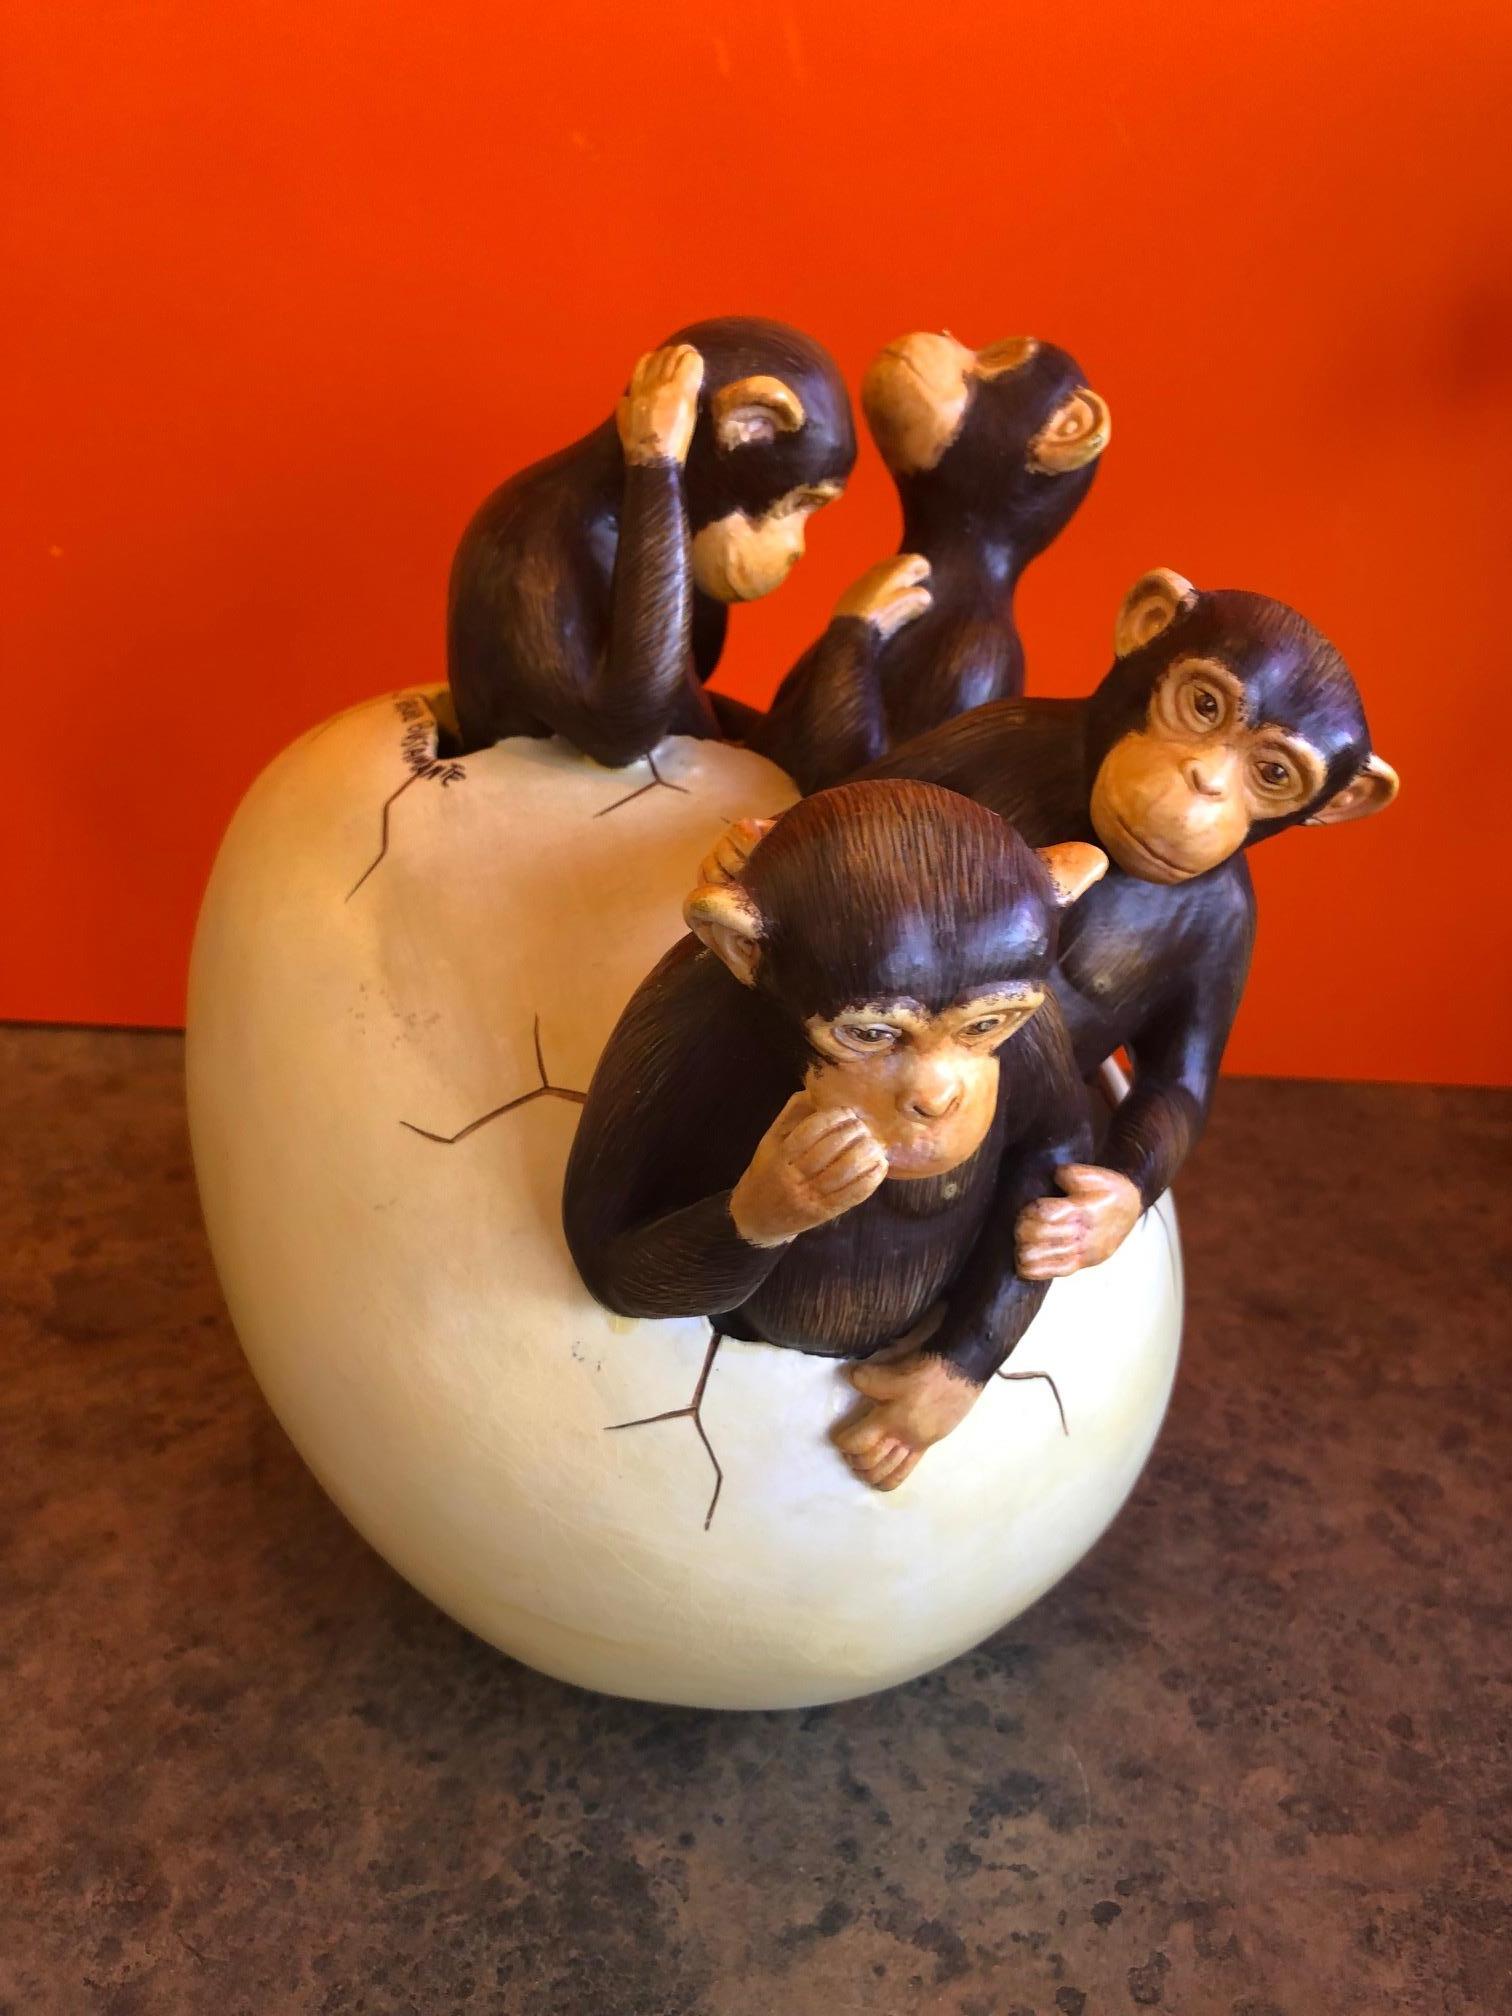 20th Century Ceramic Hatching Monkeys from Egg Sculpture by Sergio Bustamante